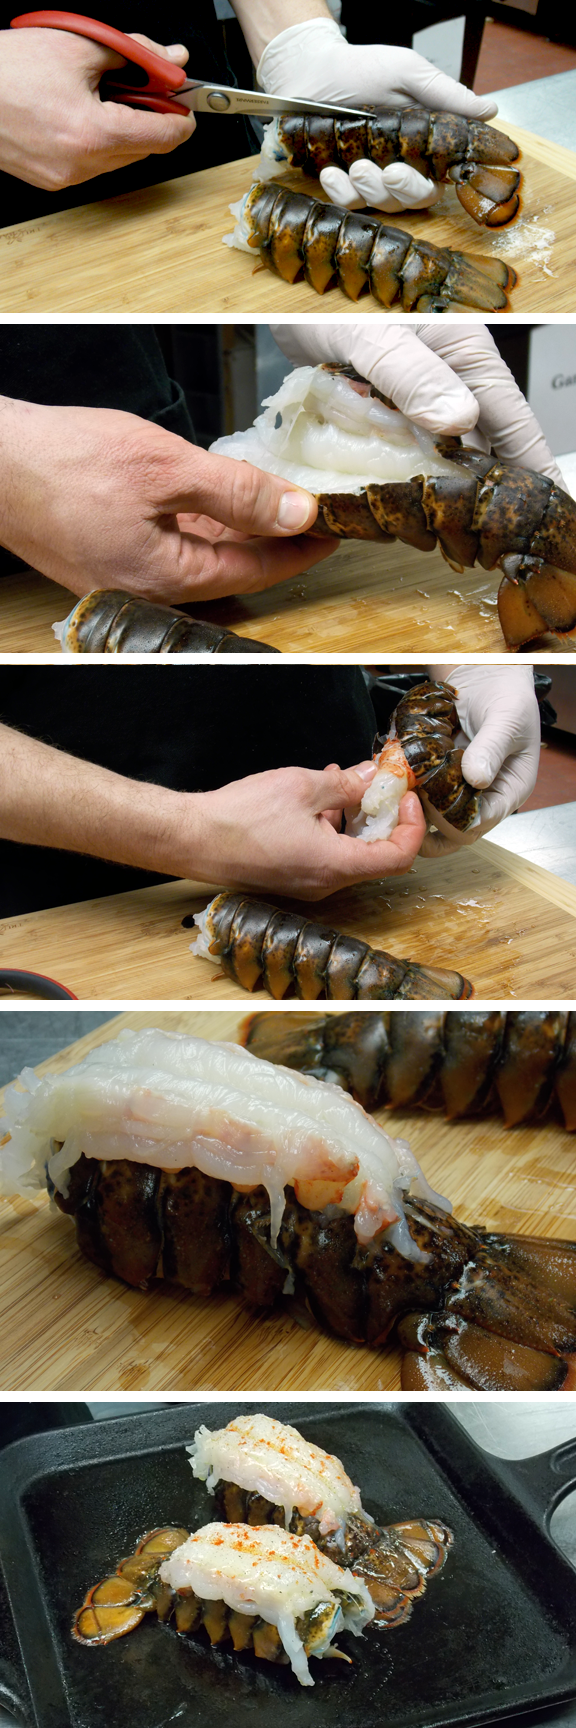 How to make #steak & lobster tail, step-by-step instructions! Perfect for #Valen